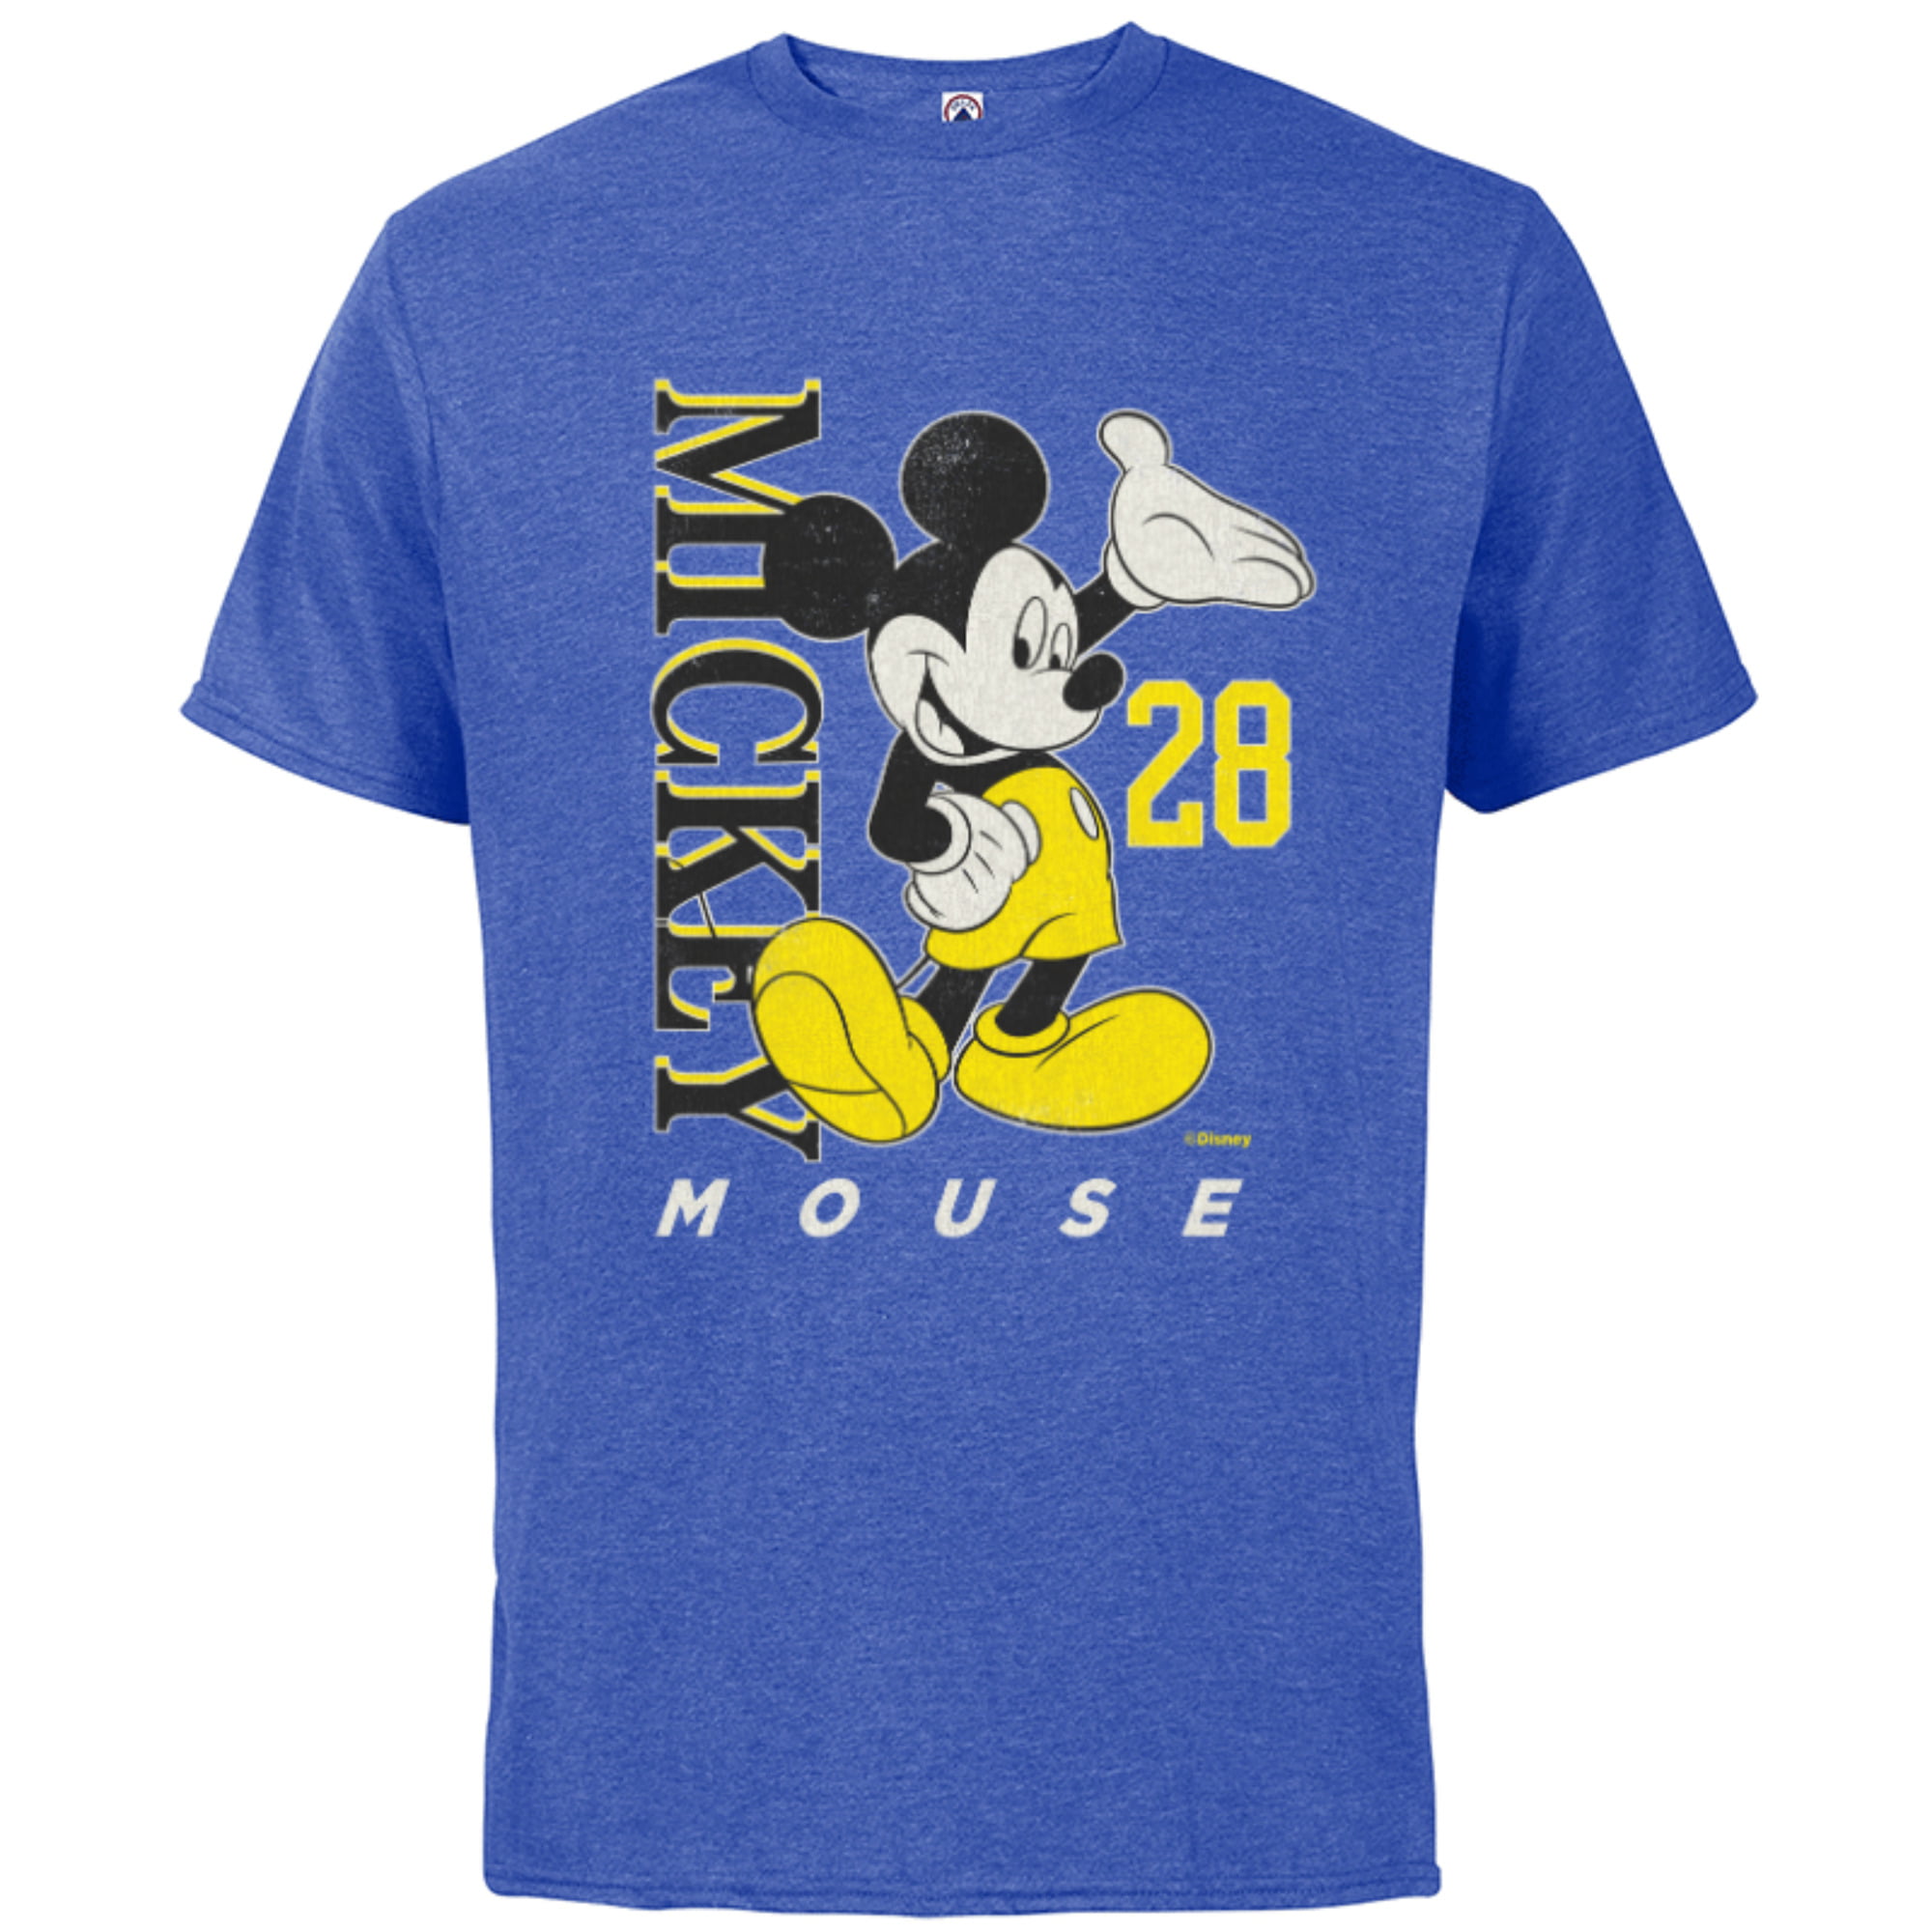 Classics & Mouse Disney Black Mickey Short Adults T-Shirt 28 Yellow Customized-Black Vintage Cotton Sleeve - - for